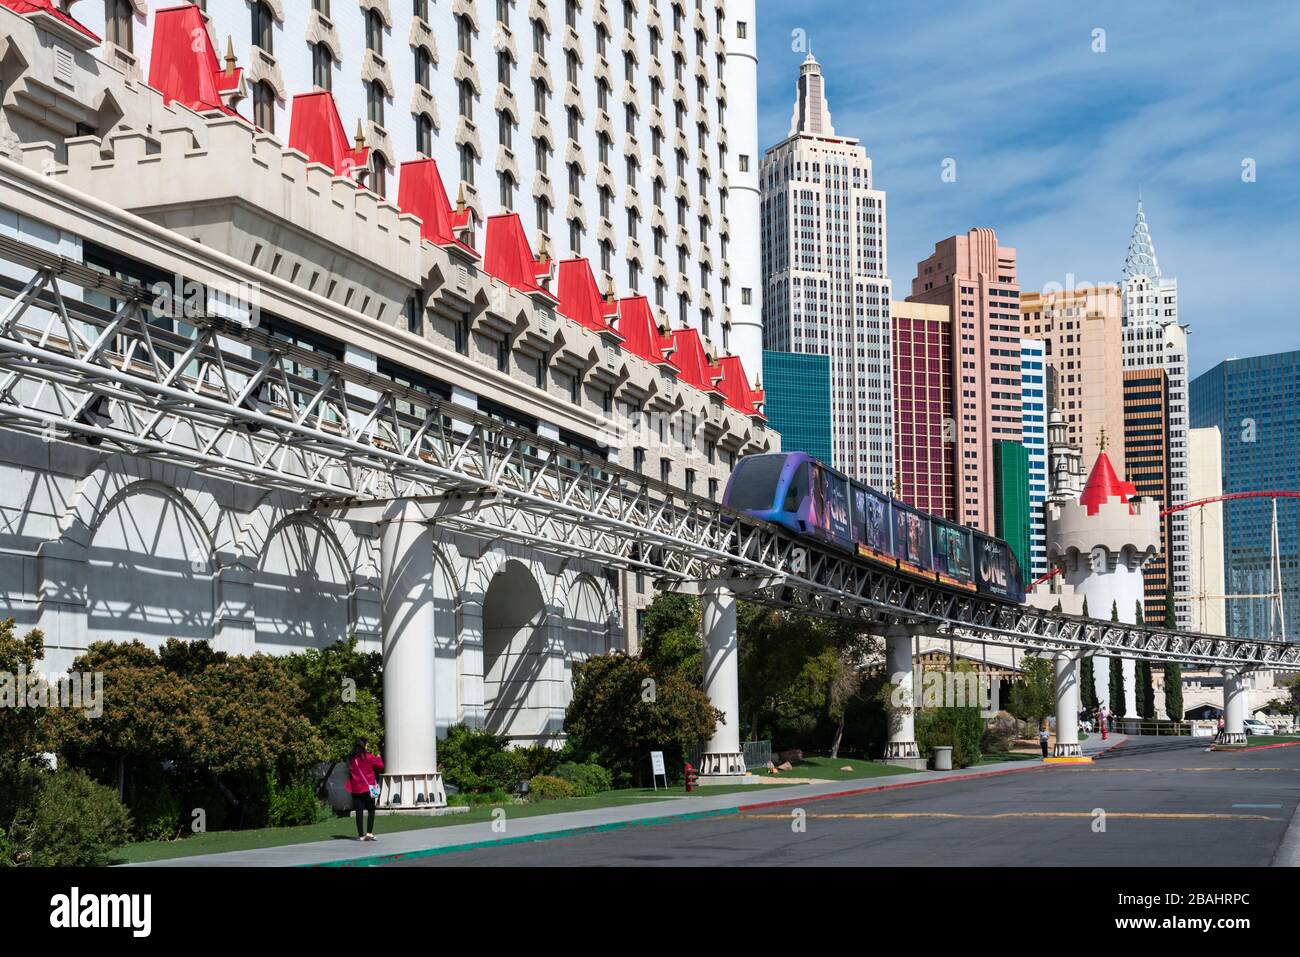 The monorail outside the Excalibur  Hotel and Casino along The Strip in Las Vegas, Nevada, USA. Stock Photo